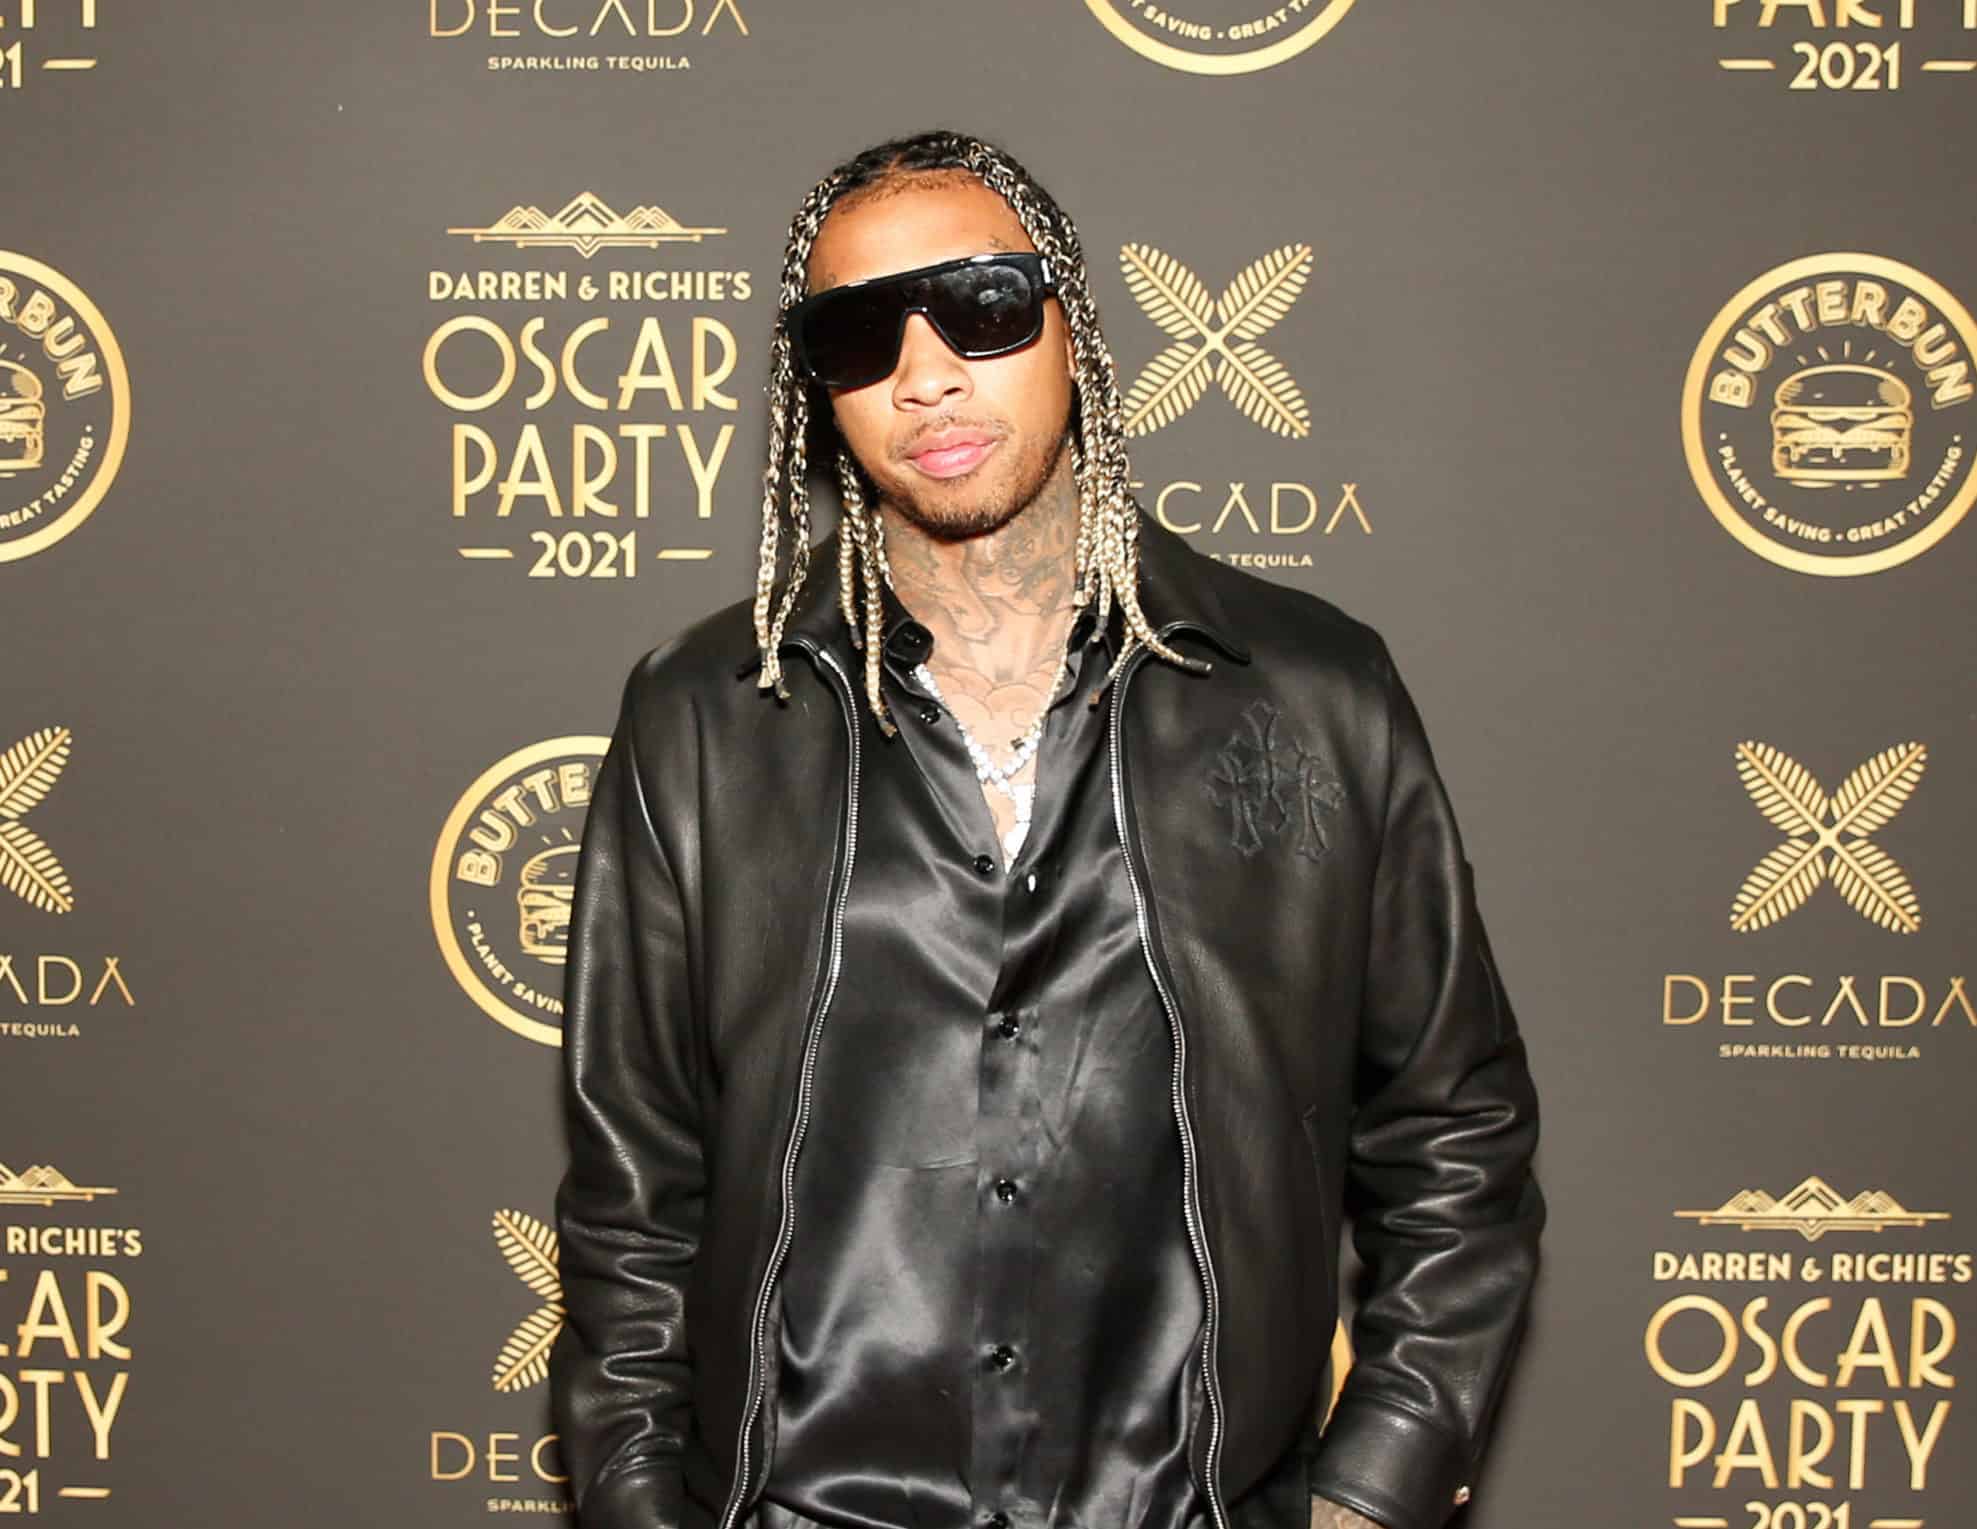 Tyga was arrested for felony domestic violence after his ex accused him of abuse and he was released on $50k bond.